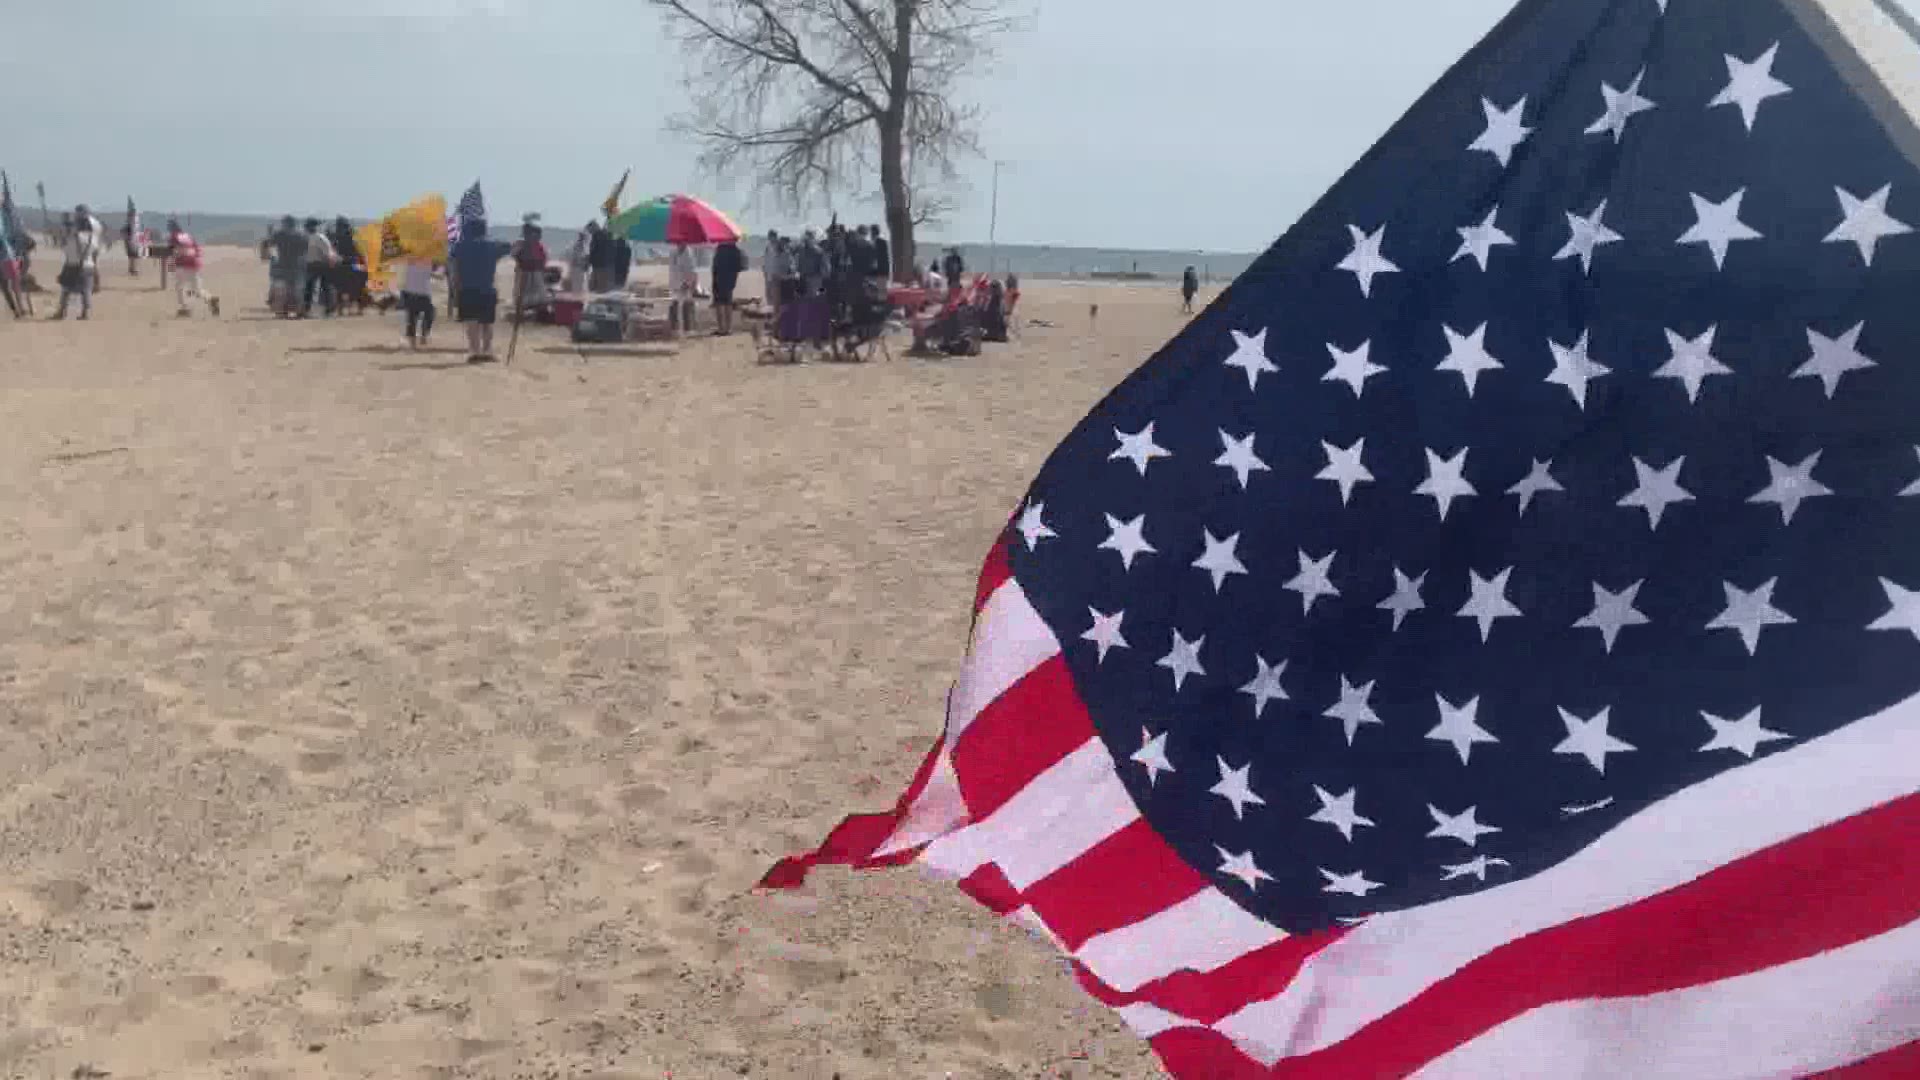 The protest against the Michigan Department Natural Resources closing the parking lot at Grand Haven State Park drew in around 80 to 100 people throughout the day.